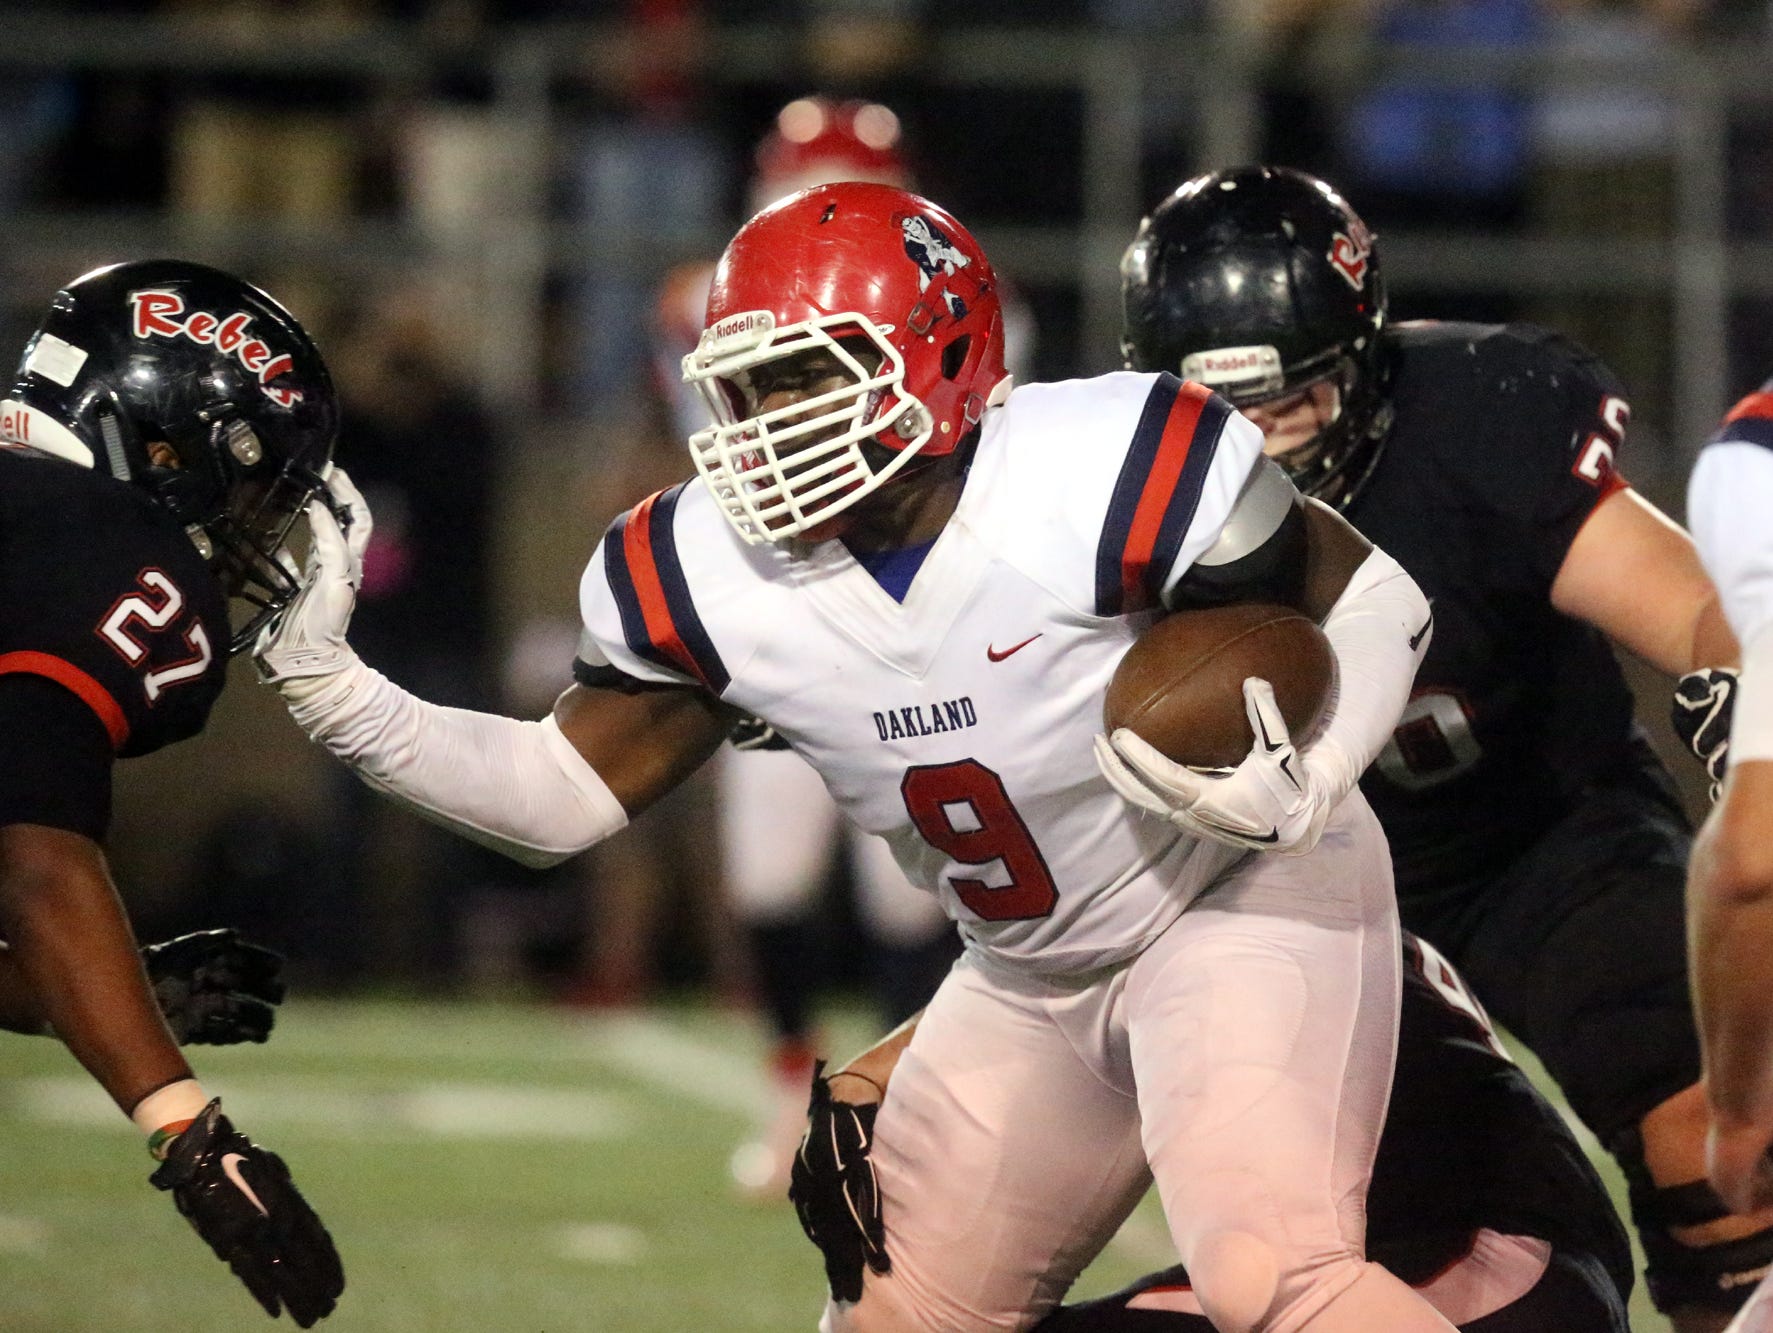 Oakland's Ty Nix (9) runs the ball as Maryville's TD Blackmon (27) moves in for the tackle Friday.